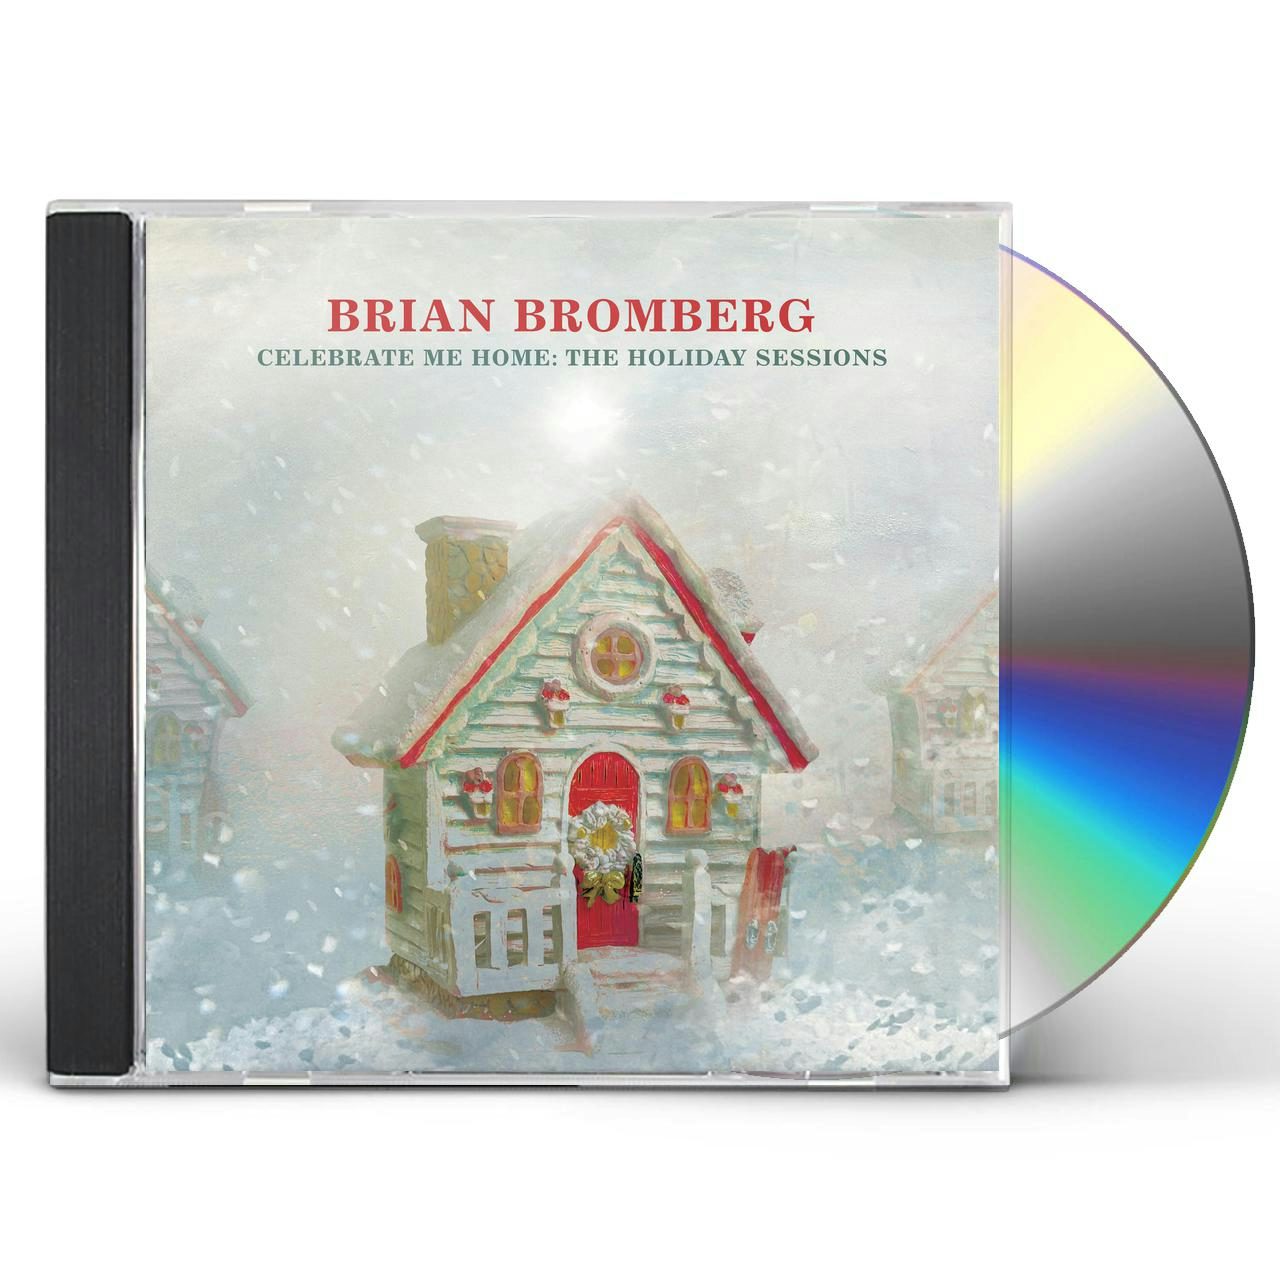 Brian Bromberg CELEBRATE ME HOME: THE HOLIDAY SESSIONS CD